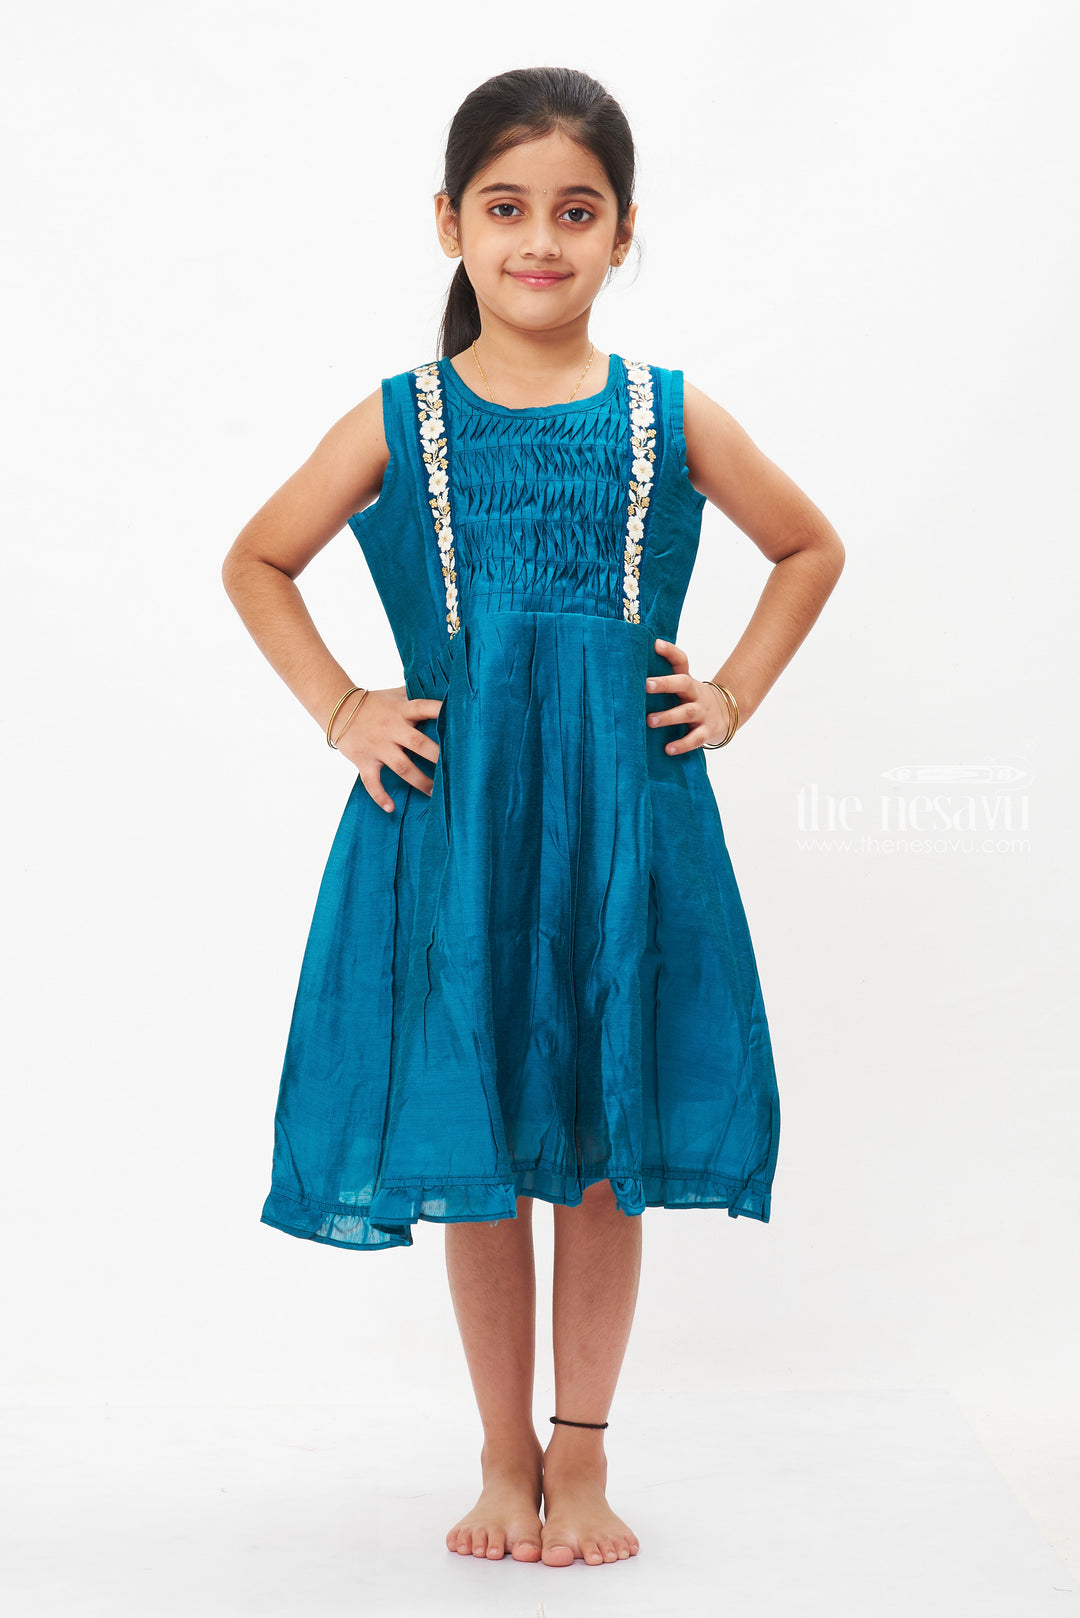 The Nesavu Girls Cotton Frock Teal Blue Pleated Frock with Elegant White Lace Detailing for Girls Nesavu 16 (1Y) / Blue / Chanderi GFC1242B-16 Elegant Teal Blue Lace Frock for Girls | Festive Children's Dress | The Nesavu